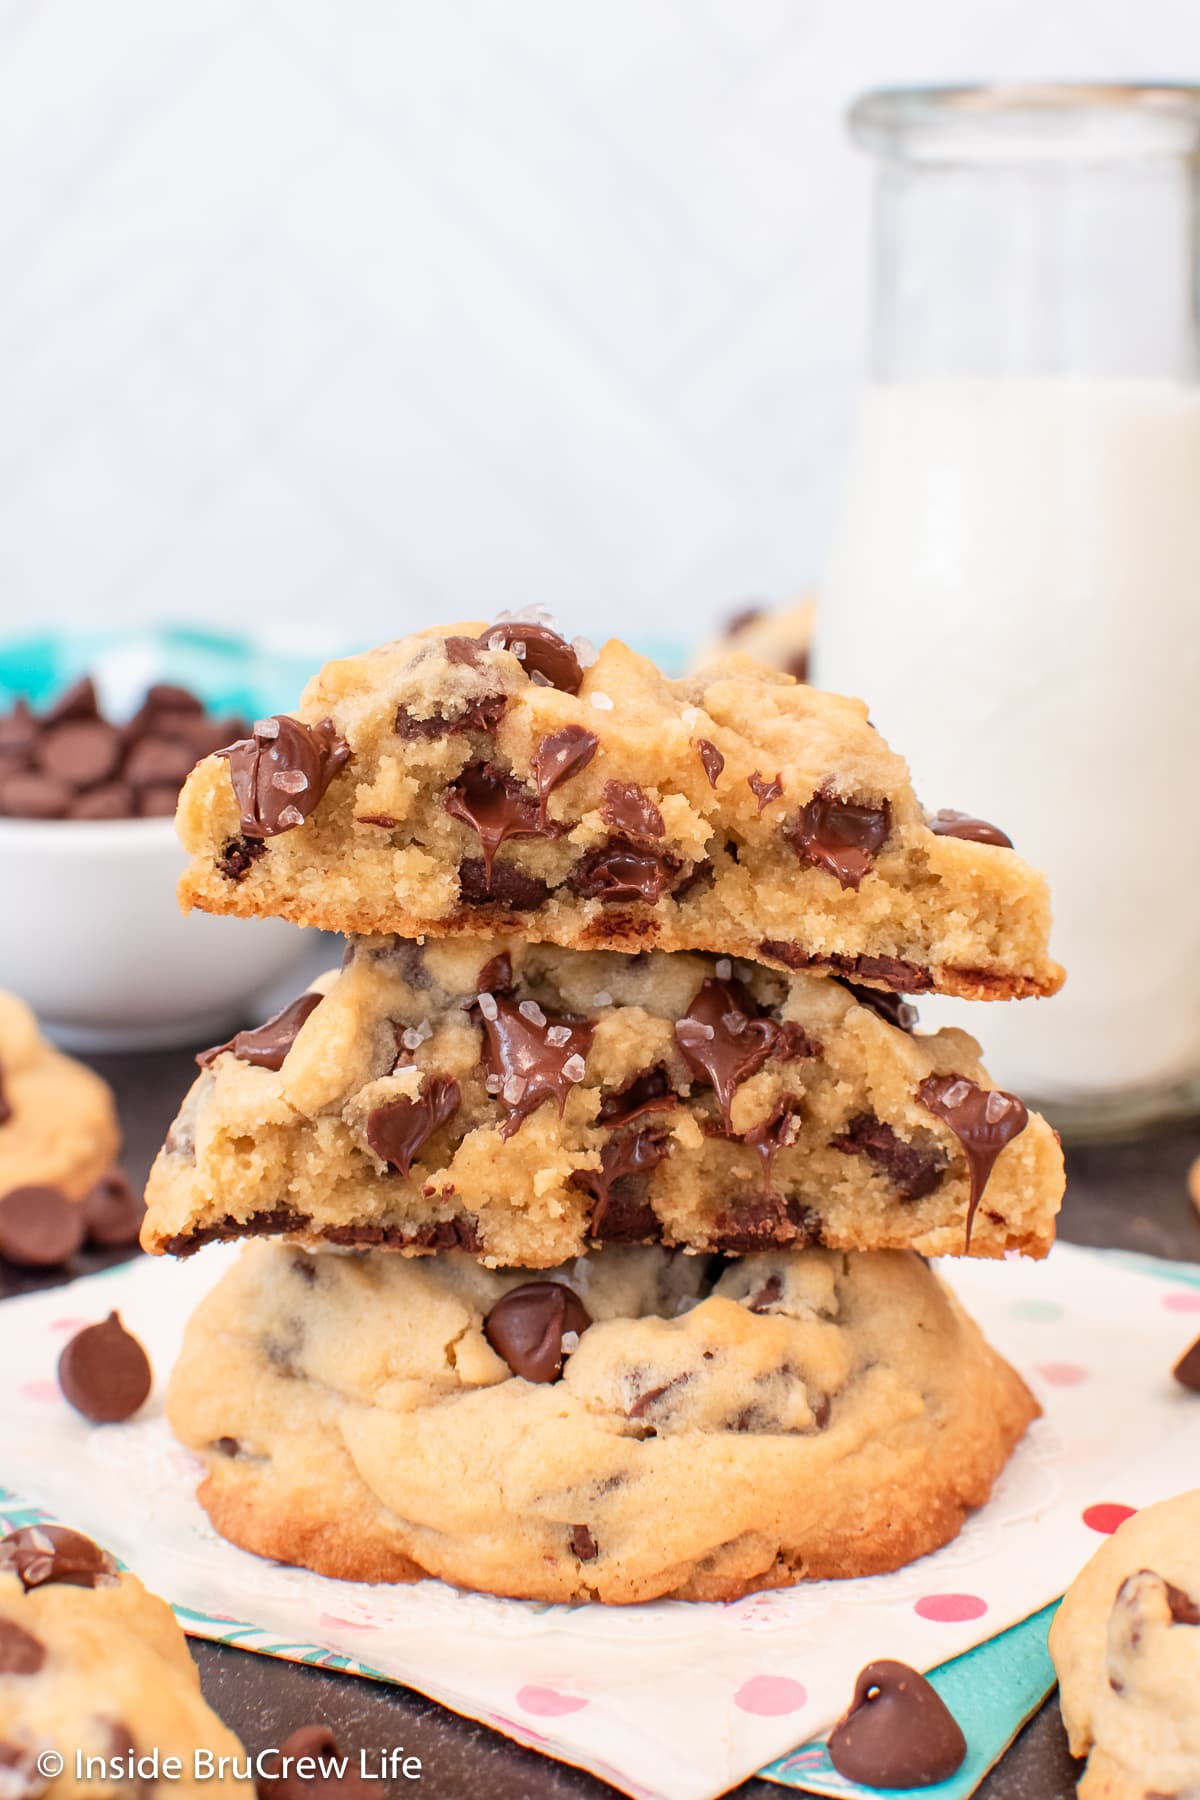 A gooey stack of chocolate chip cookies.